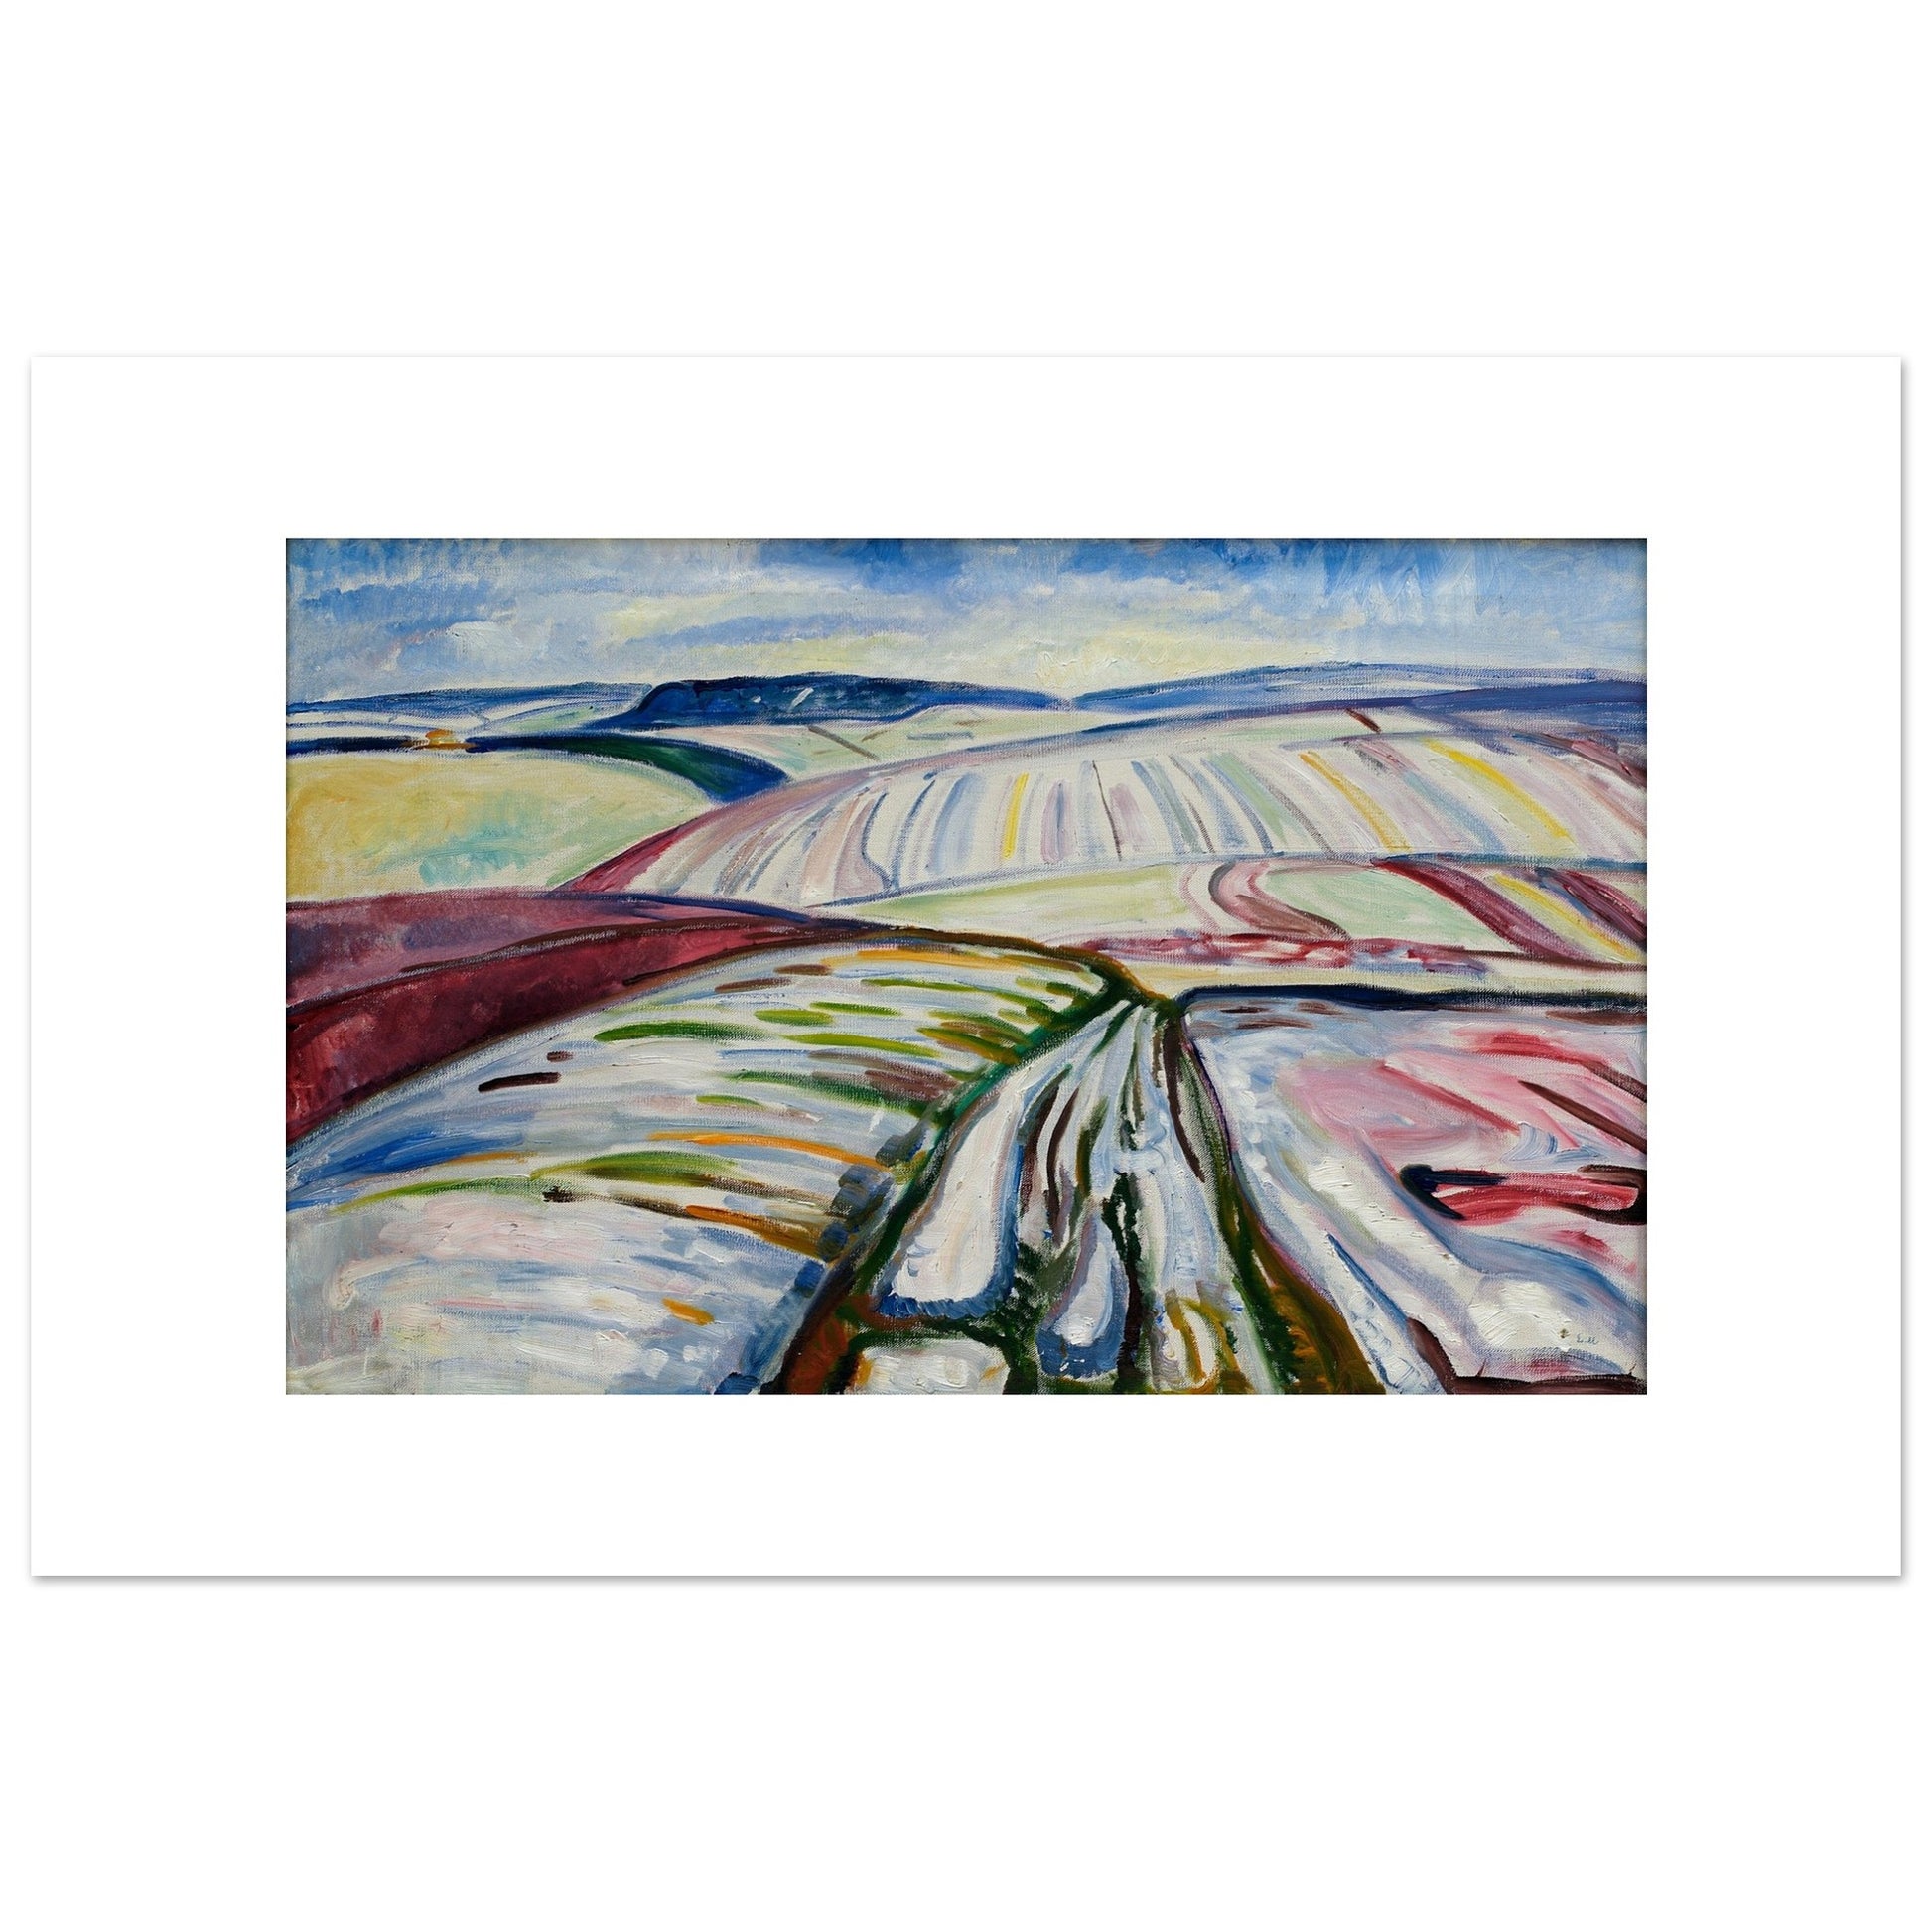 EDVARD MUNCH - FIELD IN SNOW (1907) - CLASSIC MATTE POSTER 